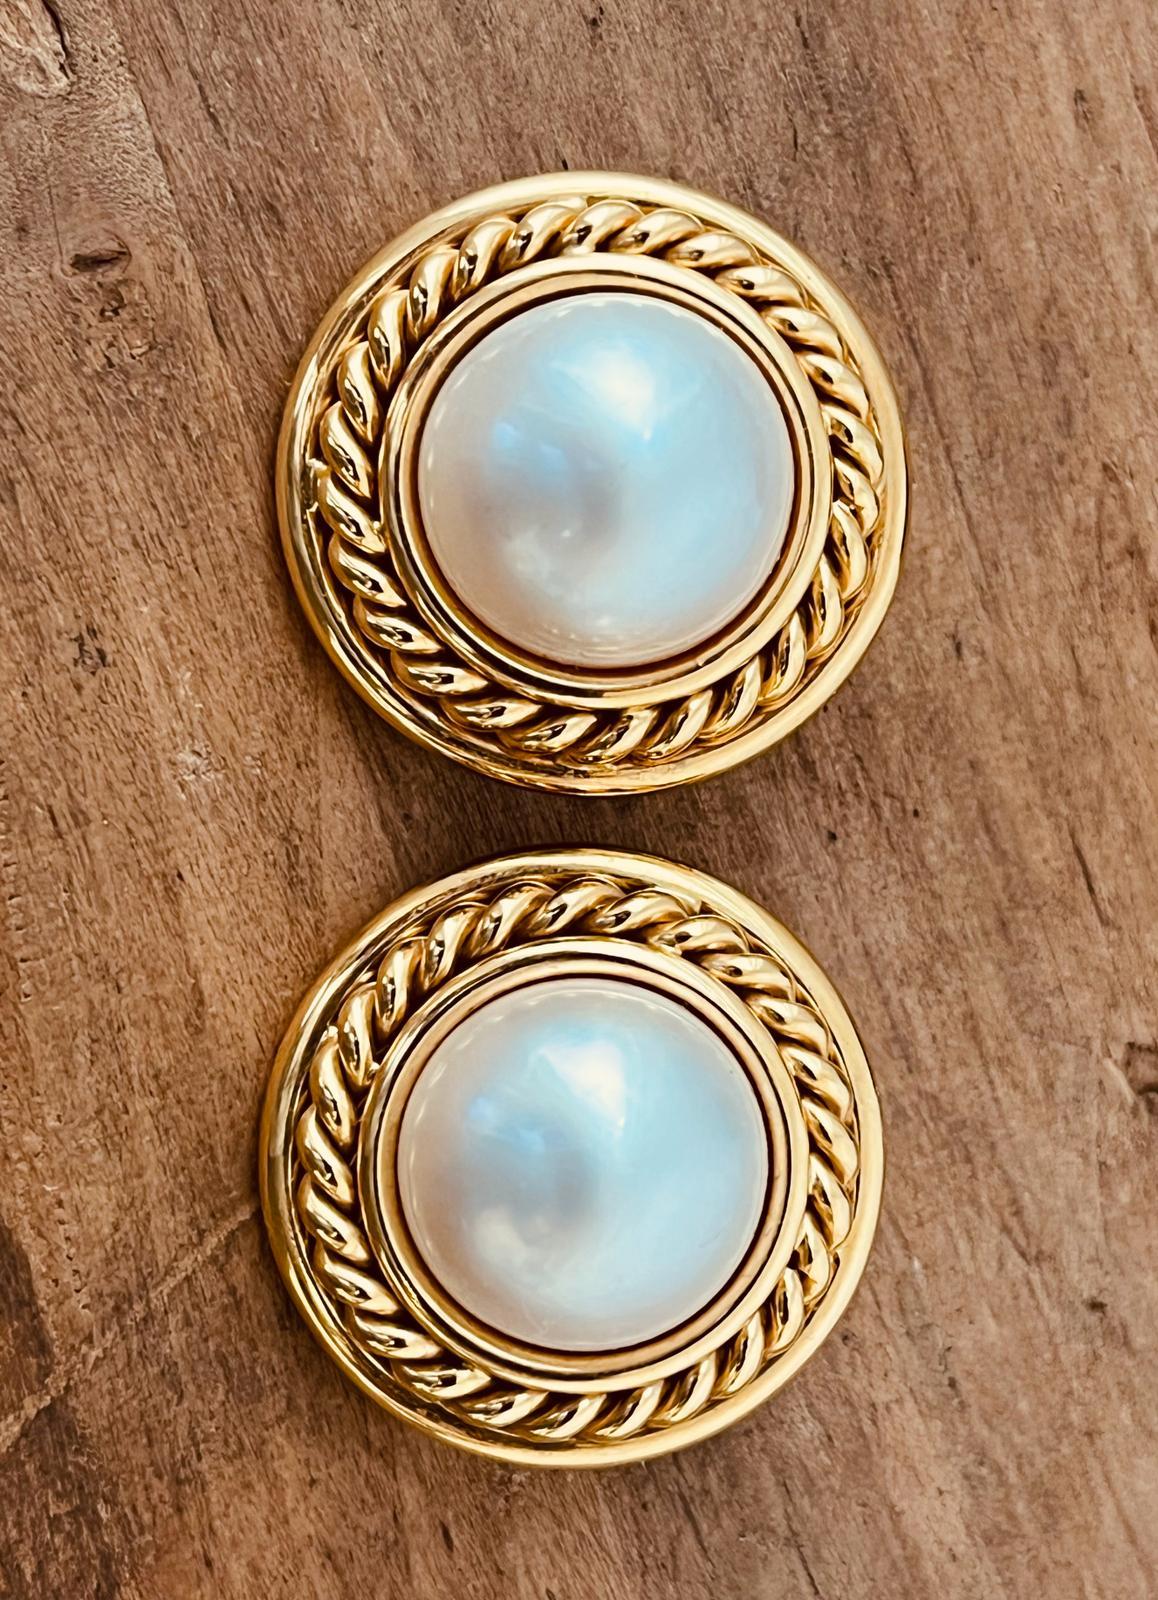 A pair of 18ct gold mabe' pearl earclips. Diameter: 25mm. Total weight:   26.1 grams . English hallmarks for 1985. Price: 3,880£. Item is in very good condition without any damage. Return policy within 3 days is applied. Please make sure you watch